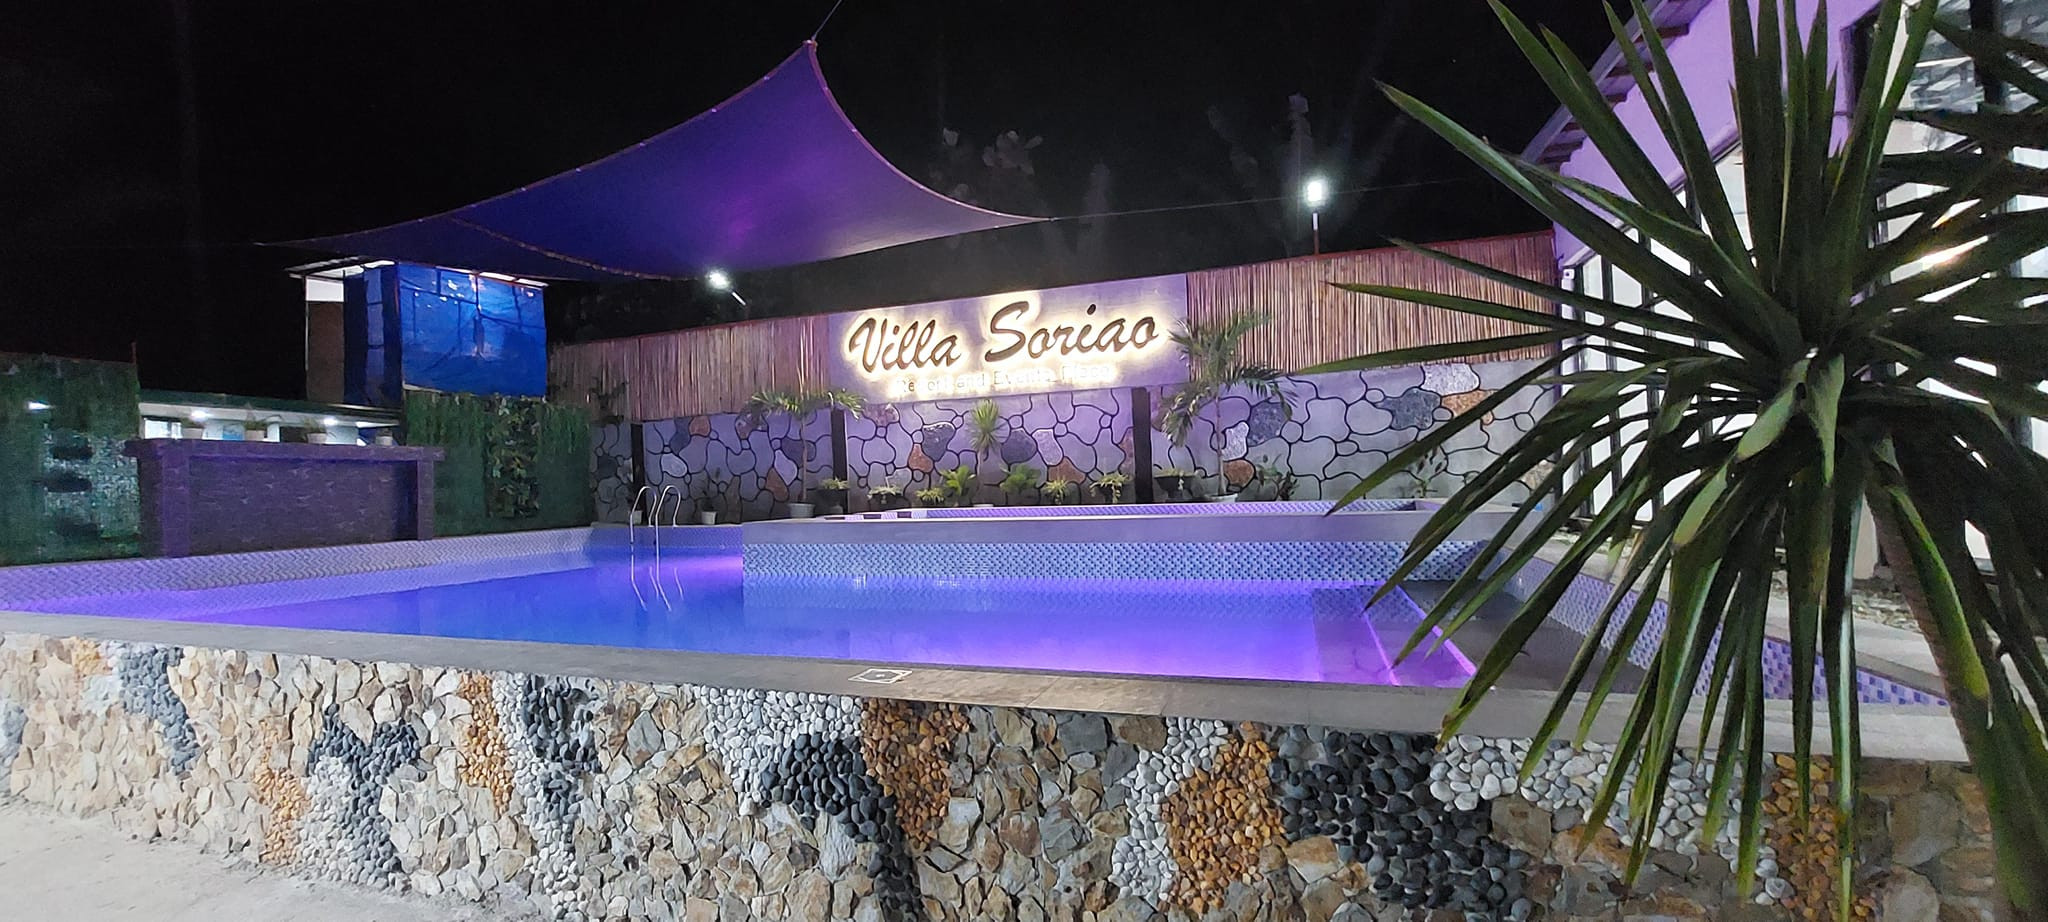 Villa Soriao Private Resort and Events Place